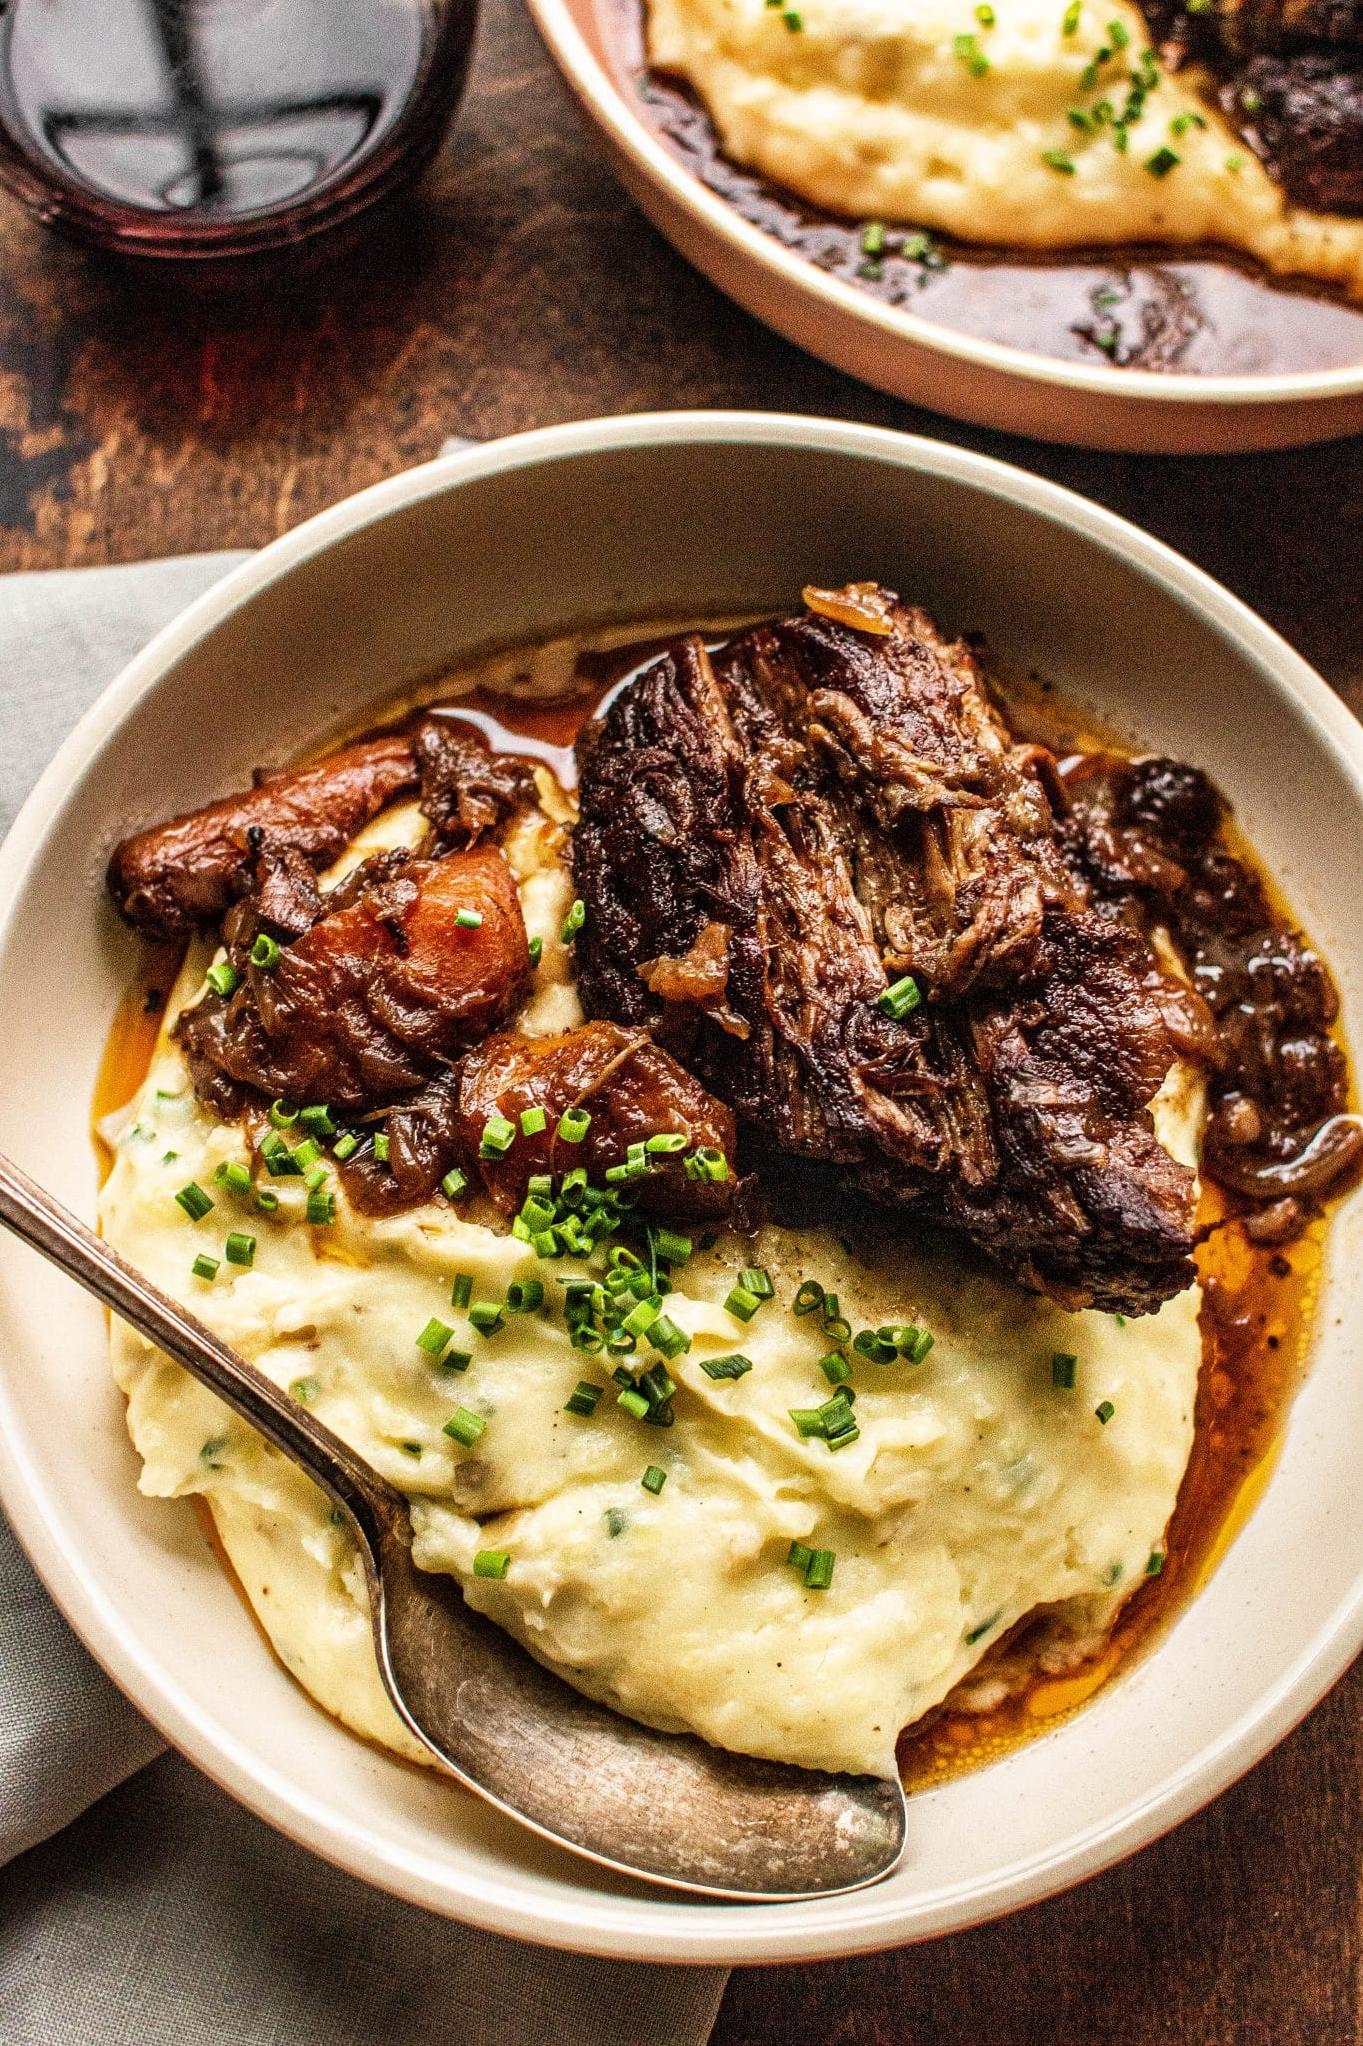  Cooking beef in a rich wine sauce is like painting a masterpiece in your kitchen